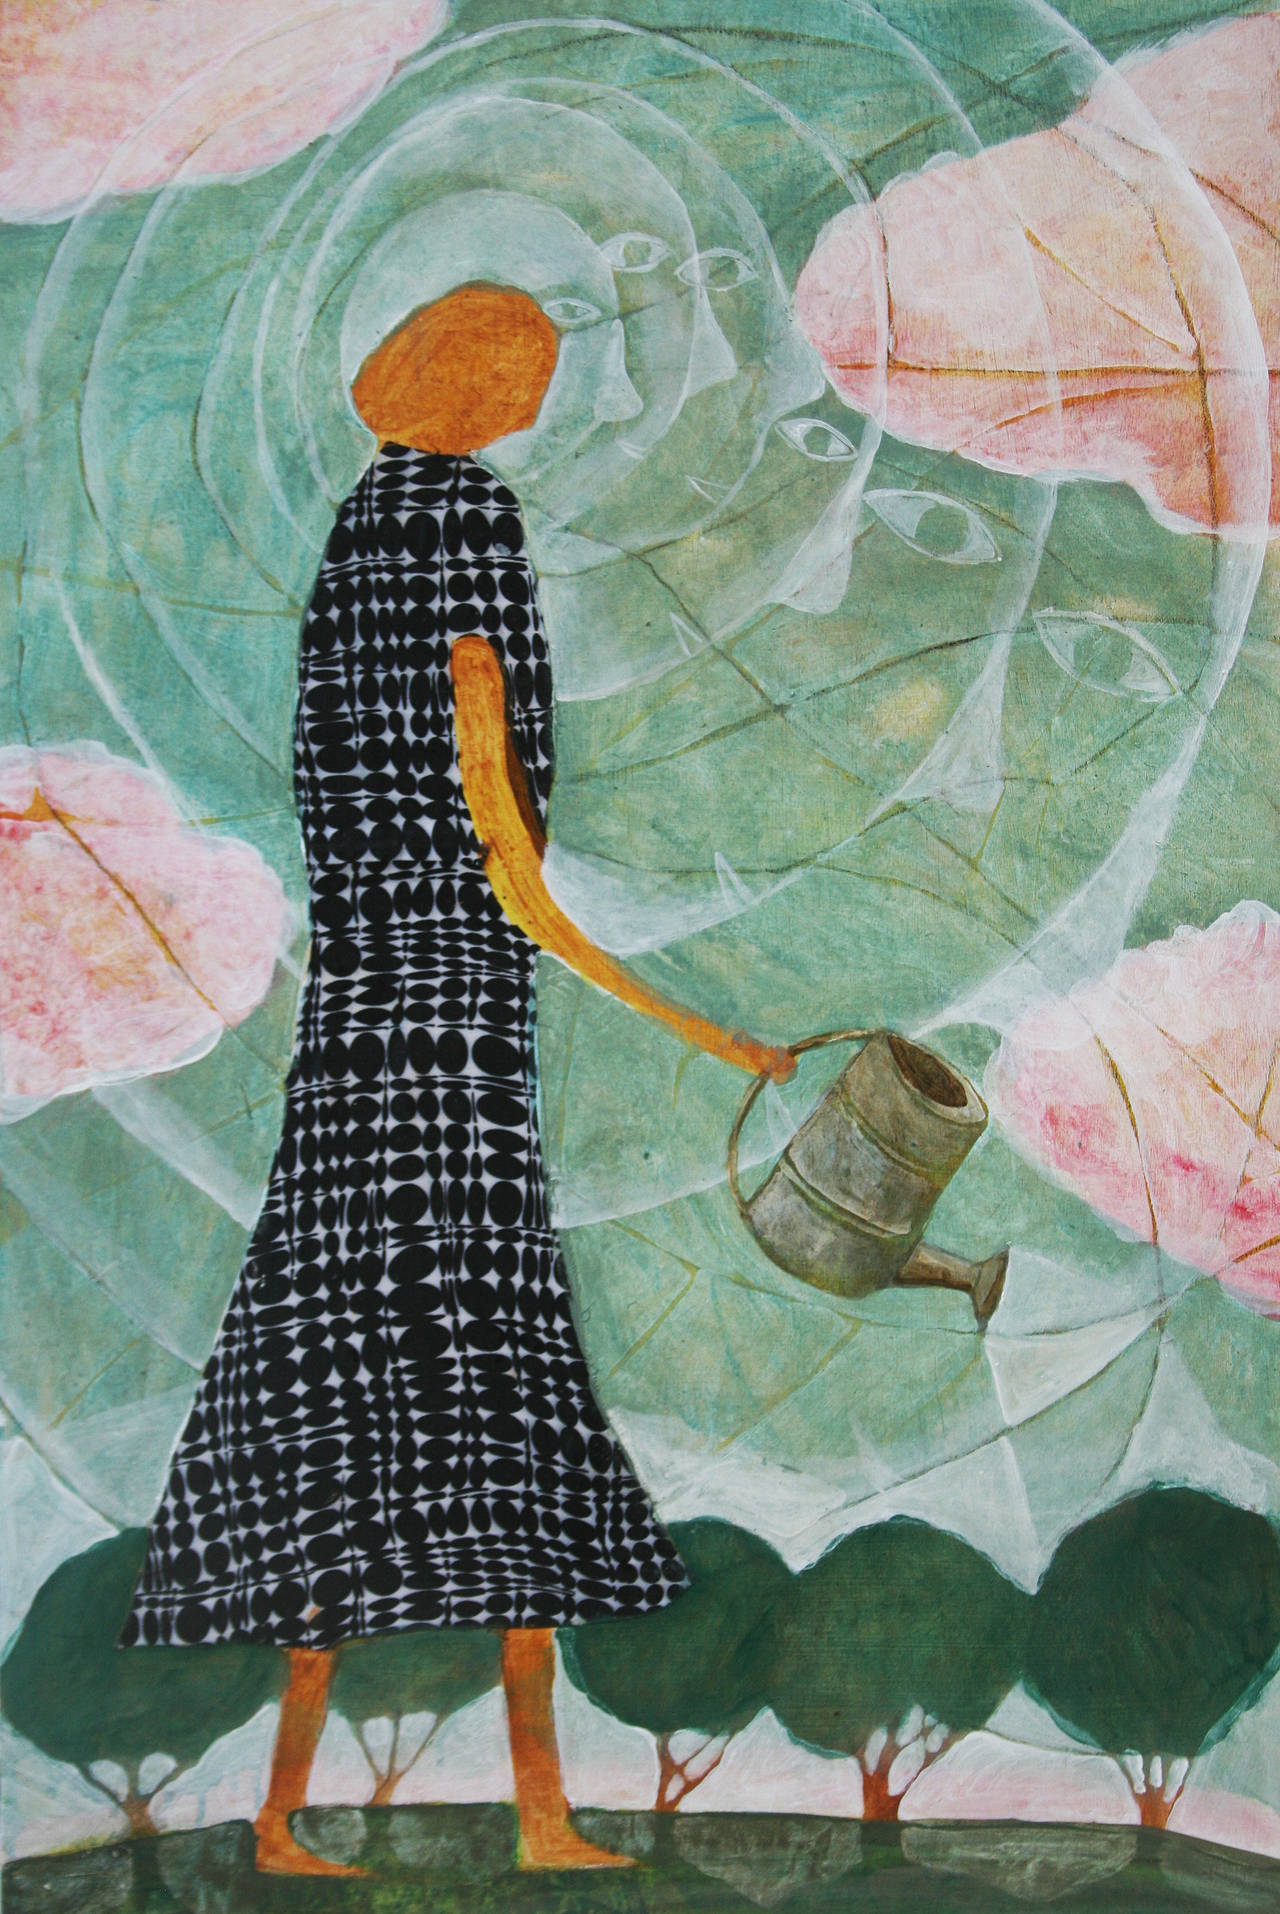 Woman with Watering Can - Mixed Media Art by Donald Saaf